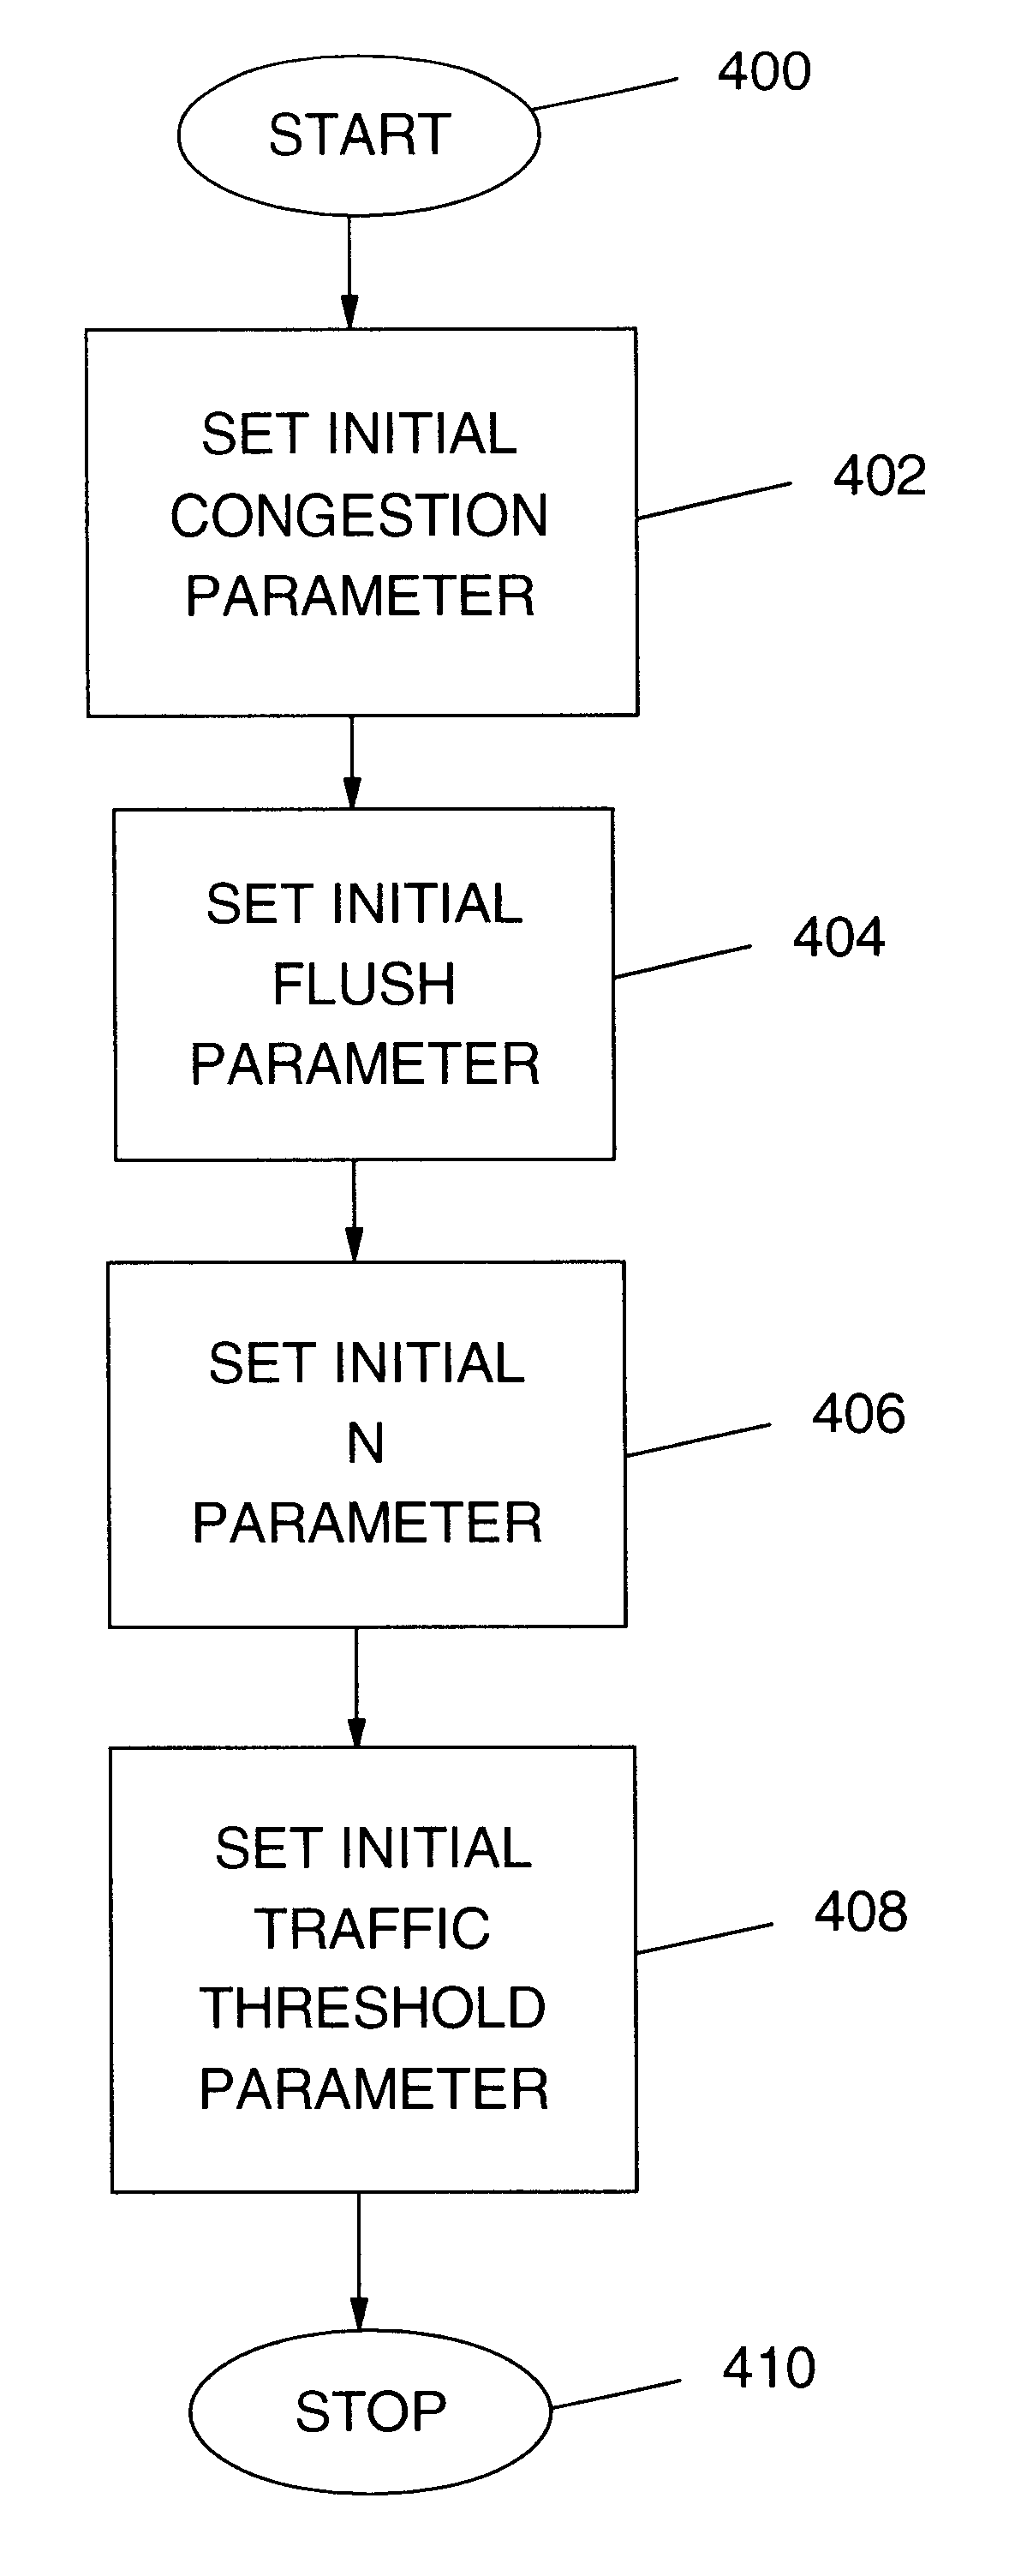 Self-tuning link aggregation system